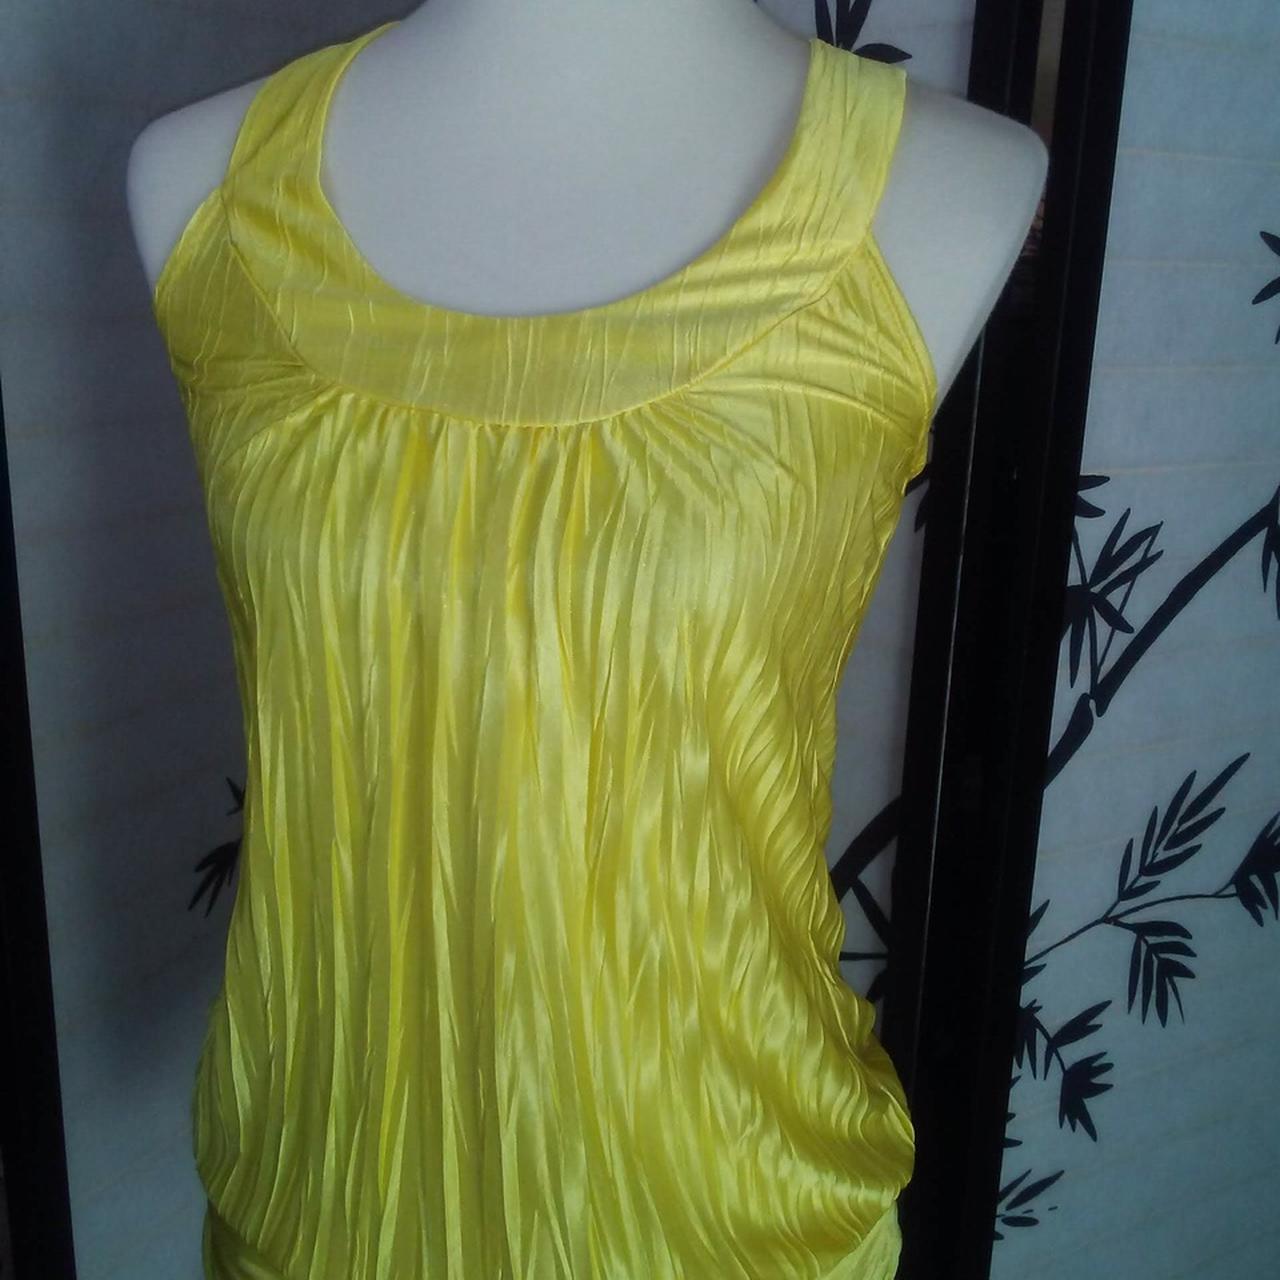 IZ Byer Women's Yellow and Silver Blouse